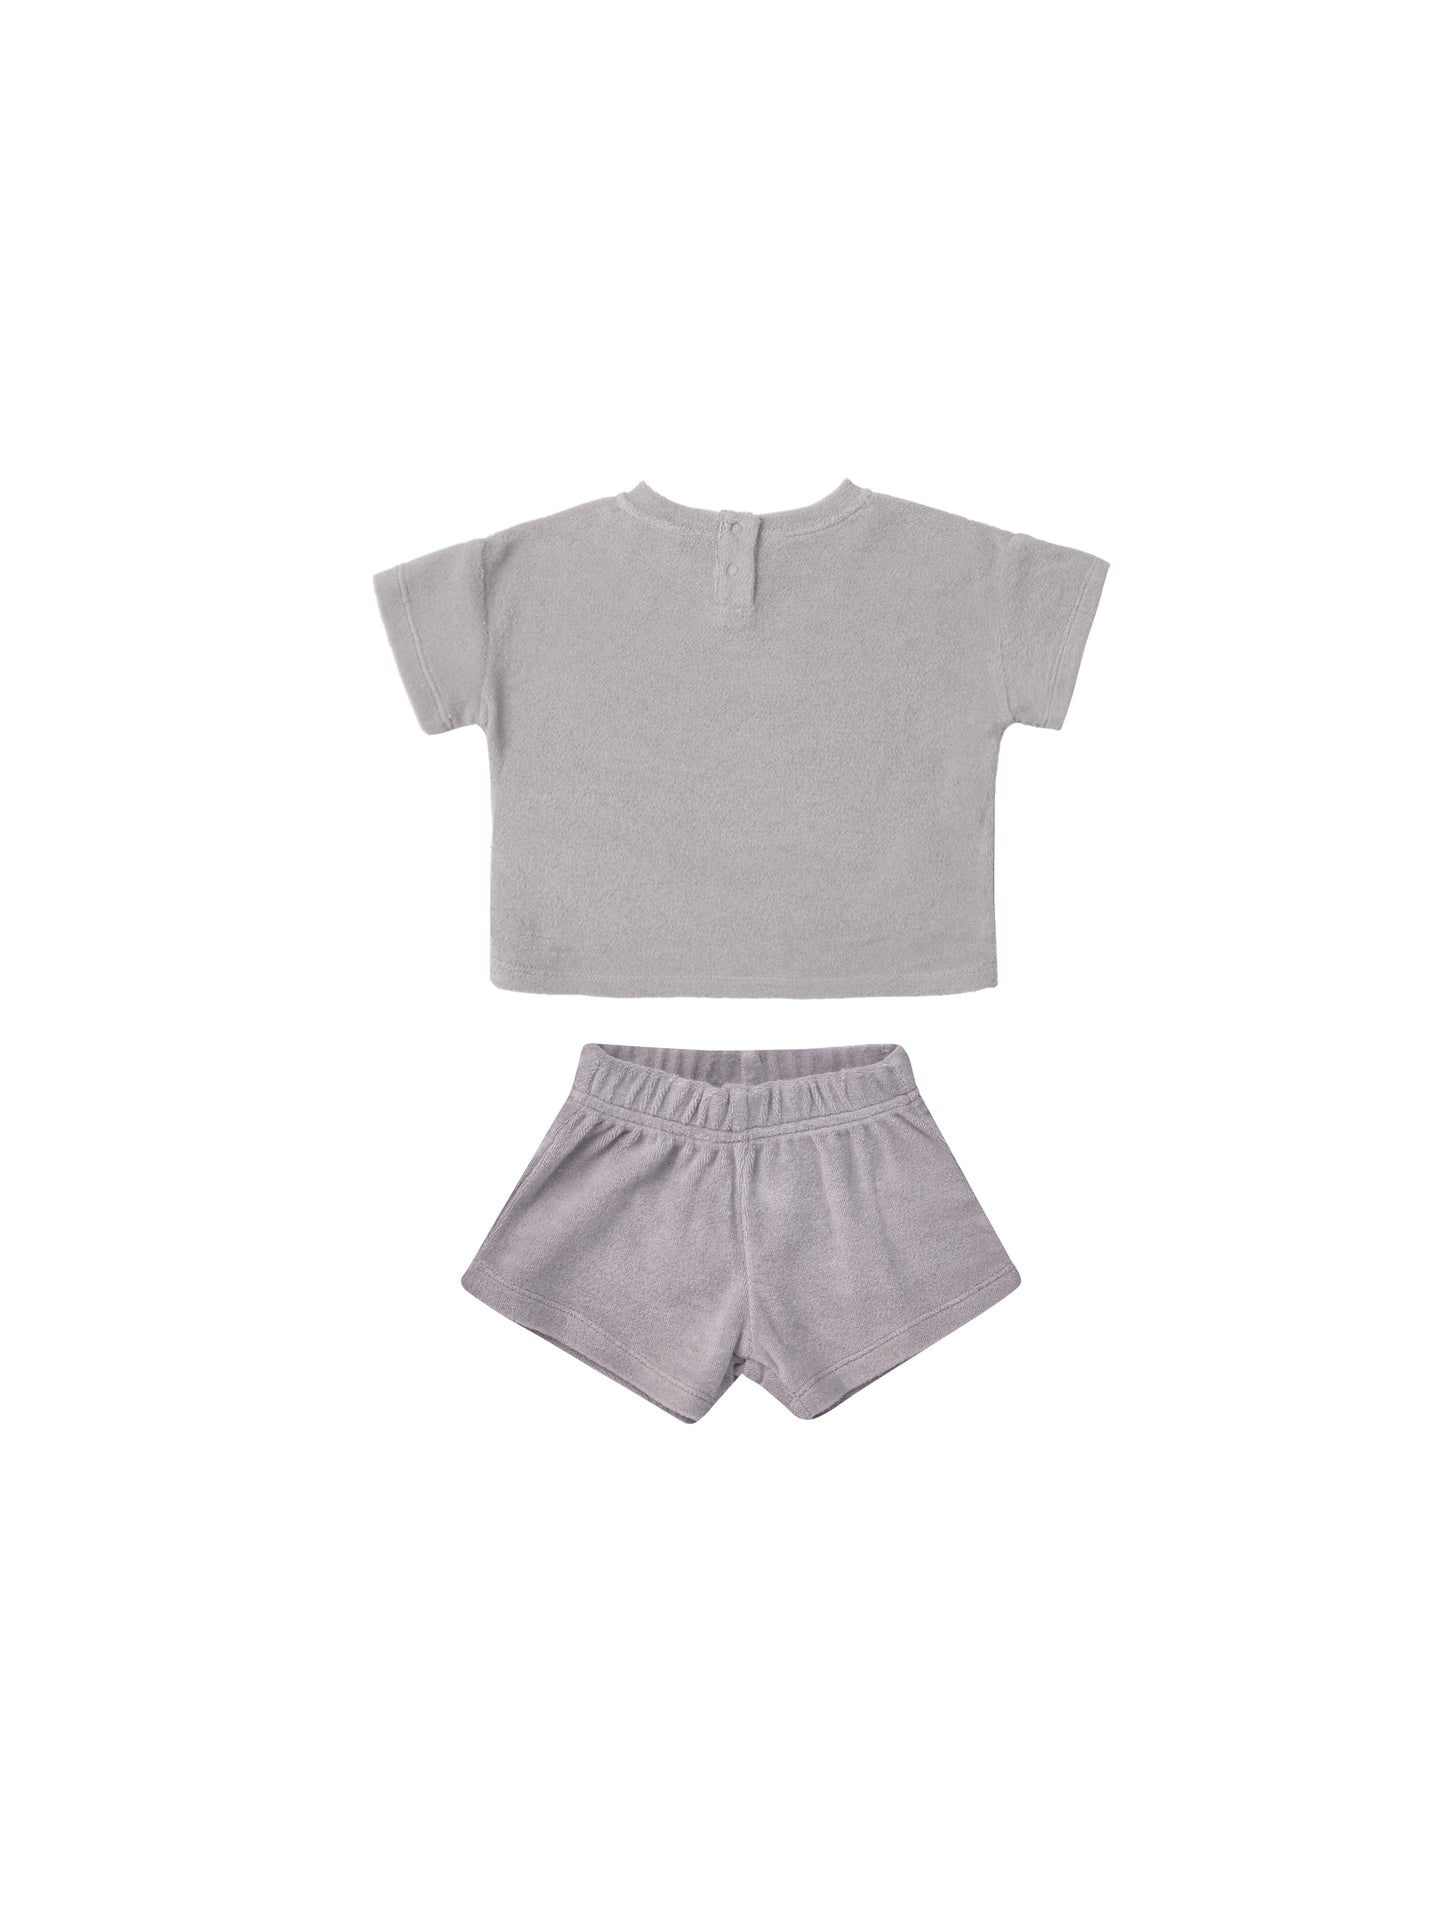 TERRY TEE + SHORTS SET || PERIWINKLE